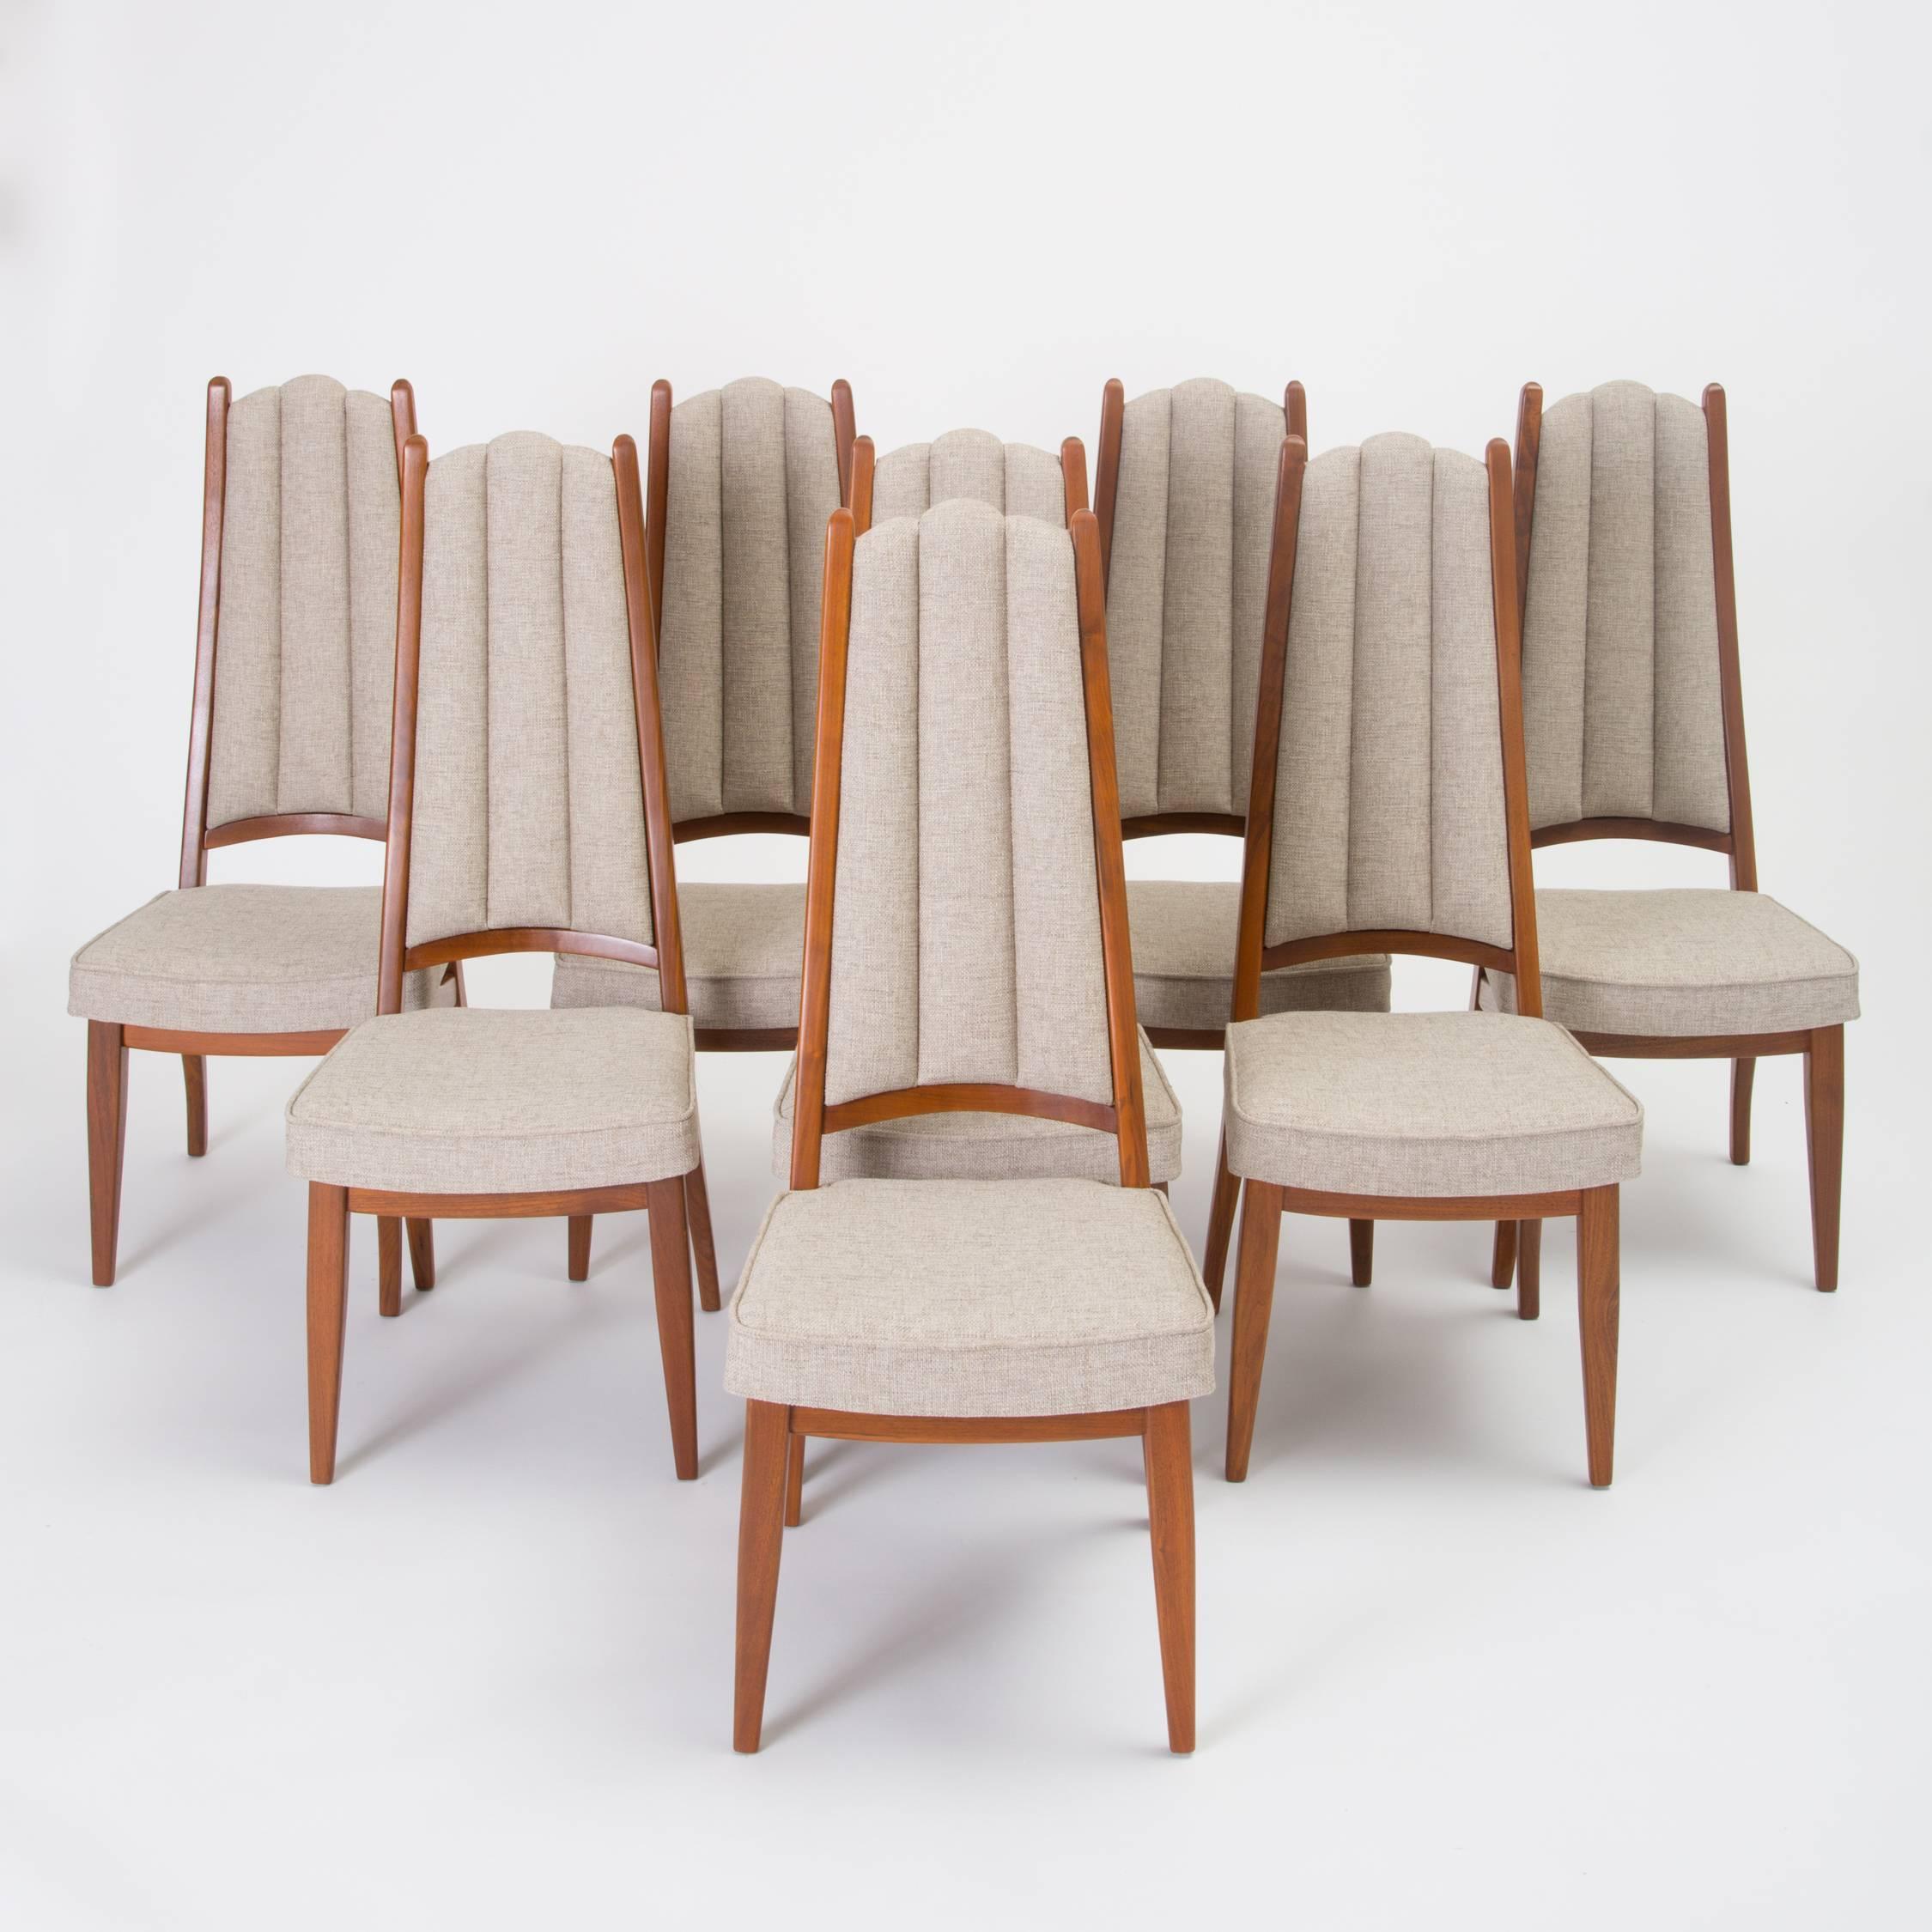 Eight high-backed dining chairs by Cal-Mode, a short-lived Culver City, Los Angeles-based manufacturer. Each chair has a solid walnut frame with angled legs and a backrest defined by two wooden finials and channel-tufted backrests. Each chair bears